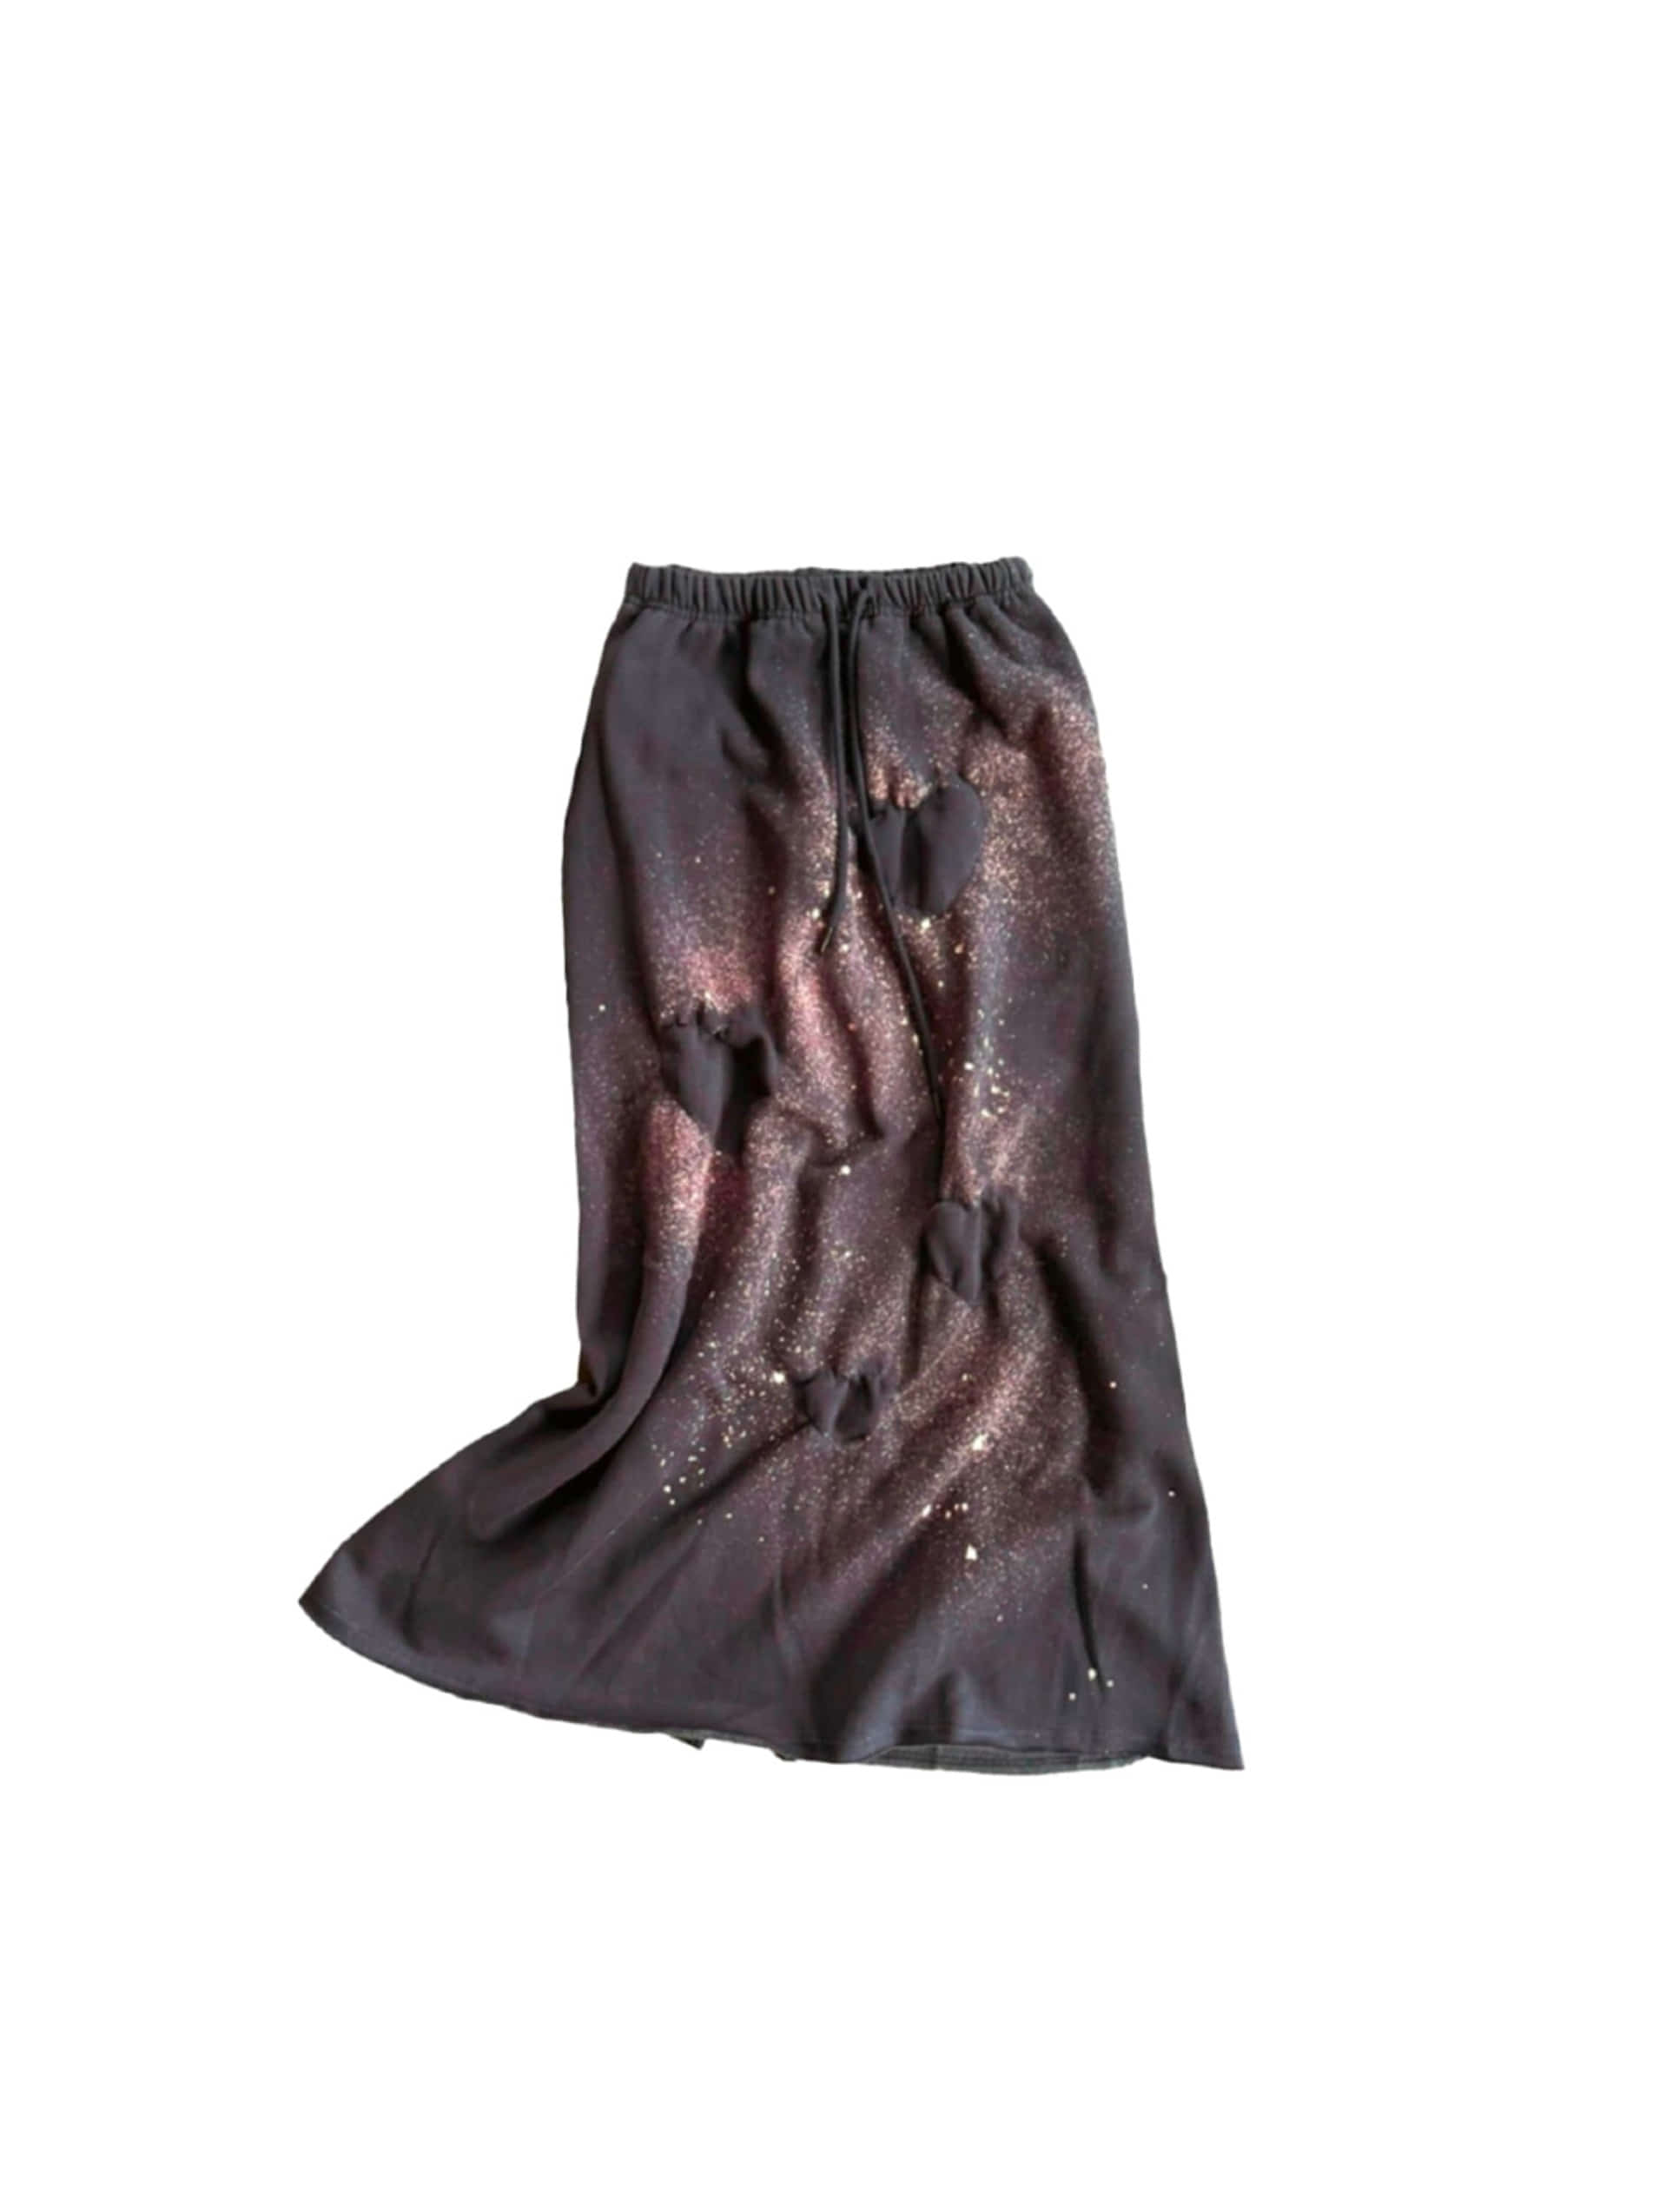 For Sunshine Moments Bleach Dying Sweat Skirt Charcoal